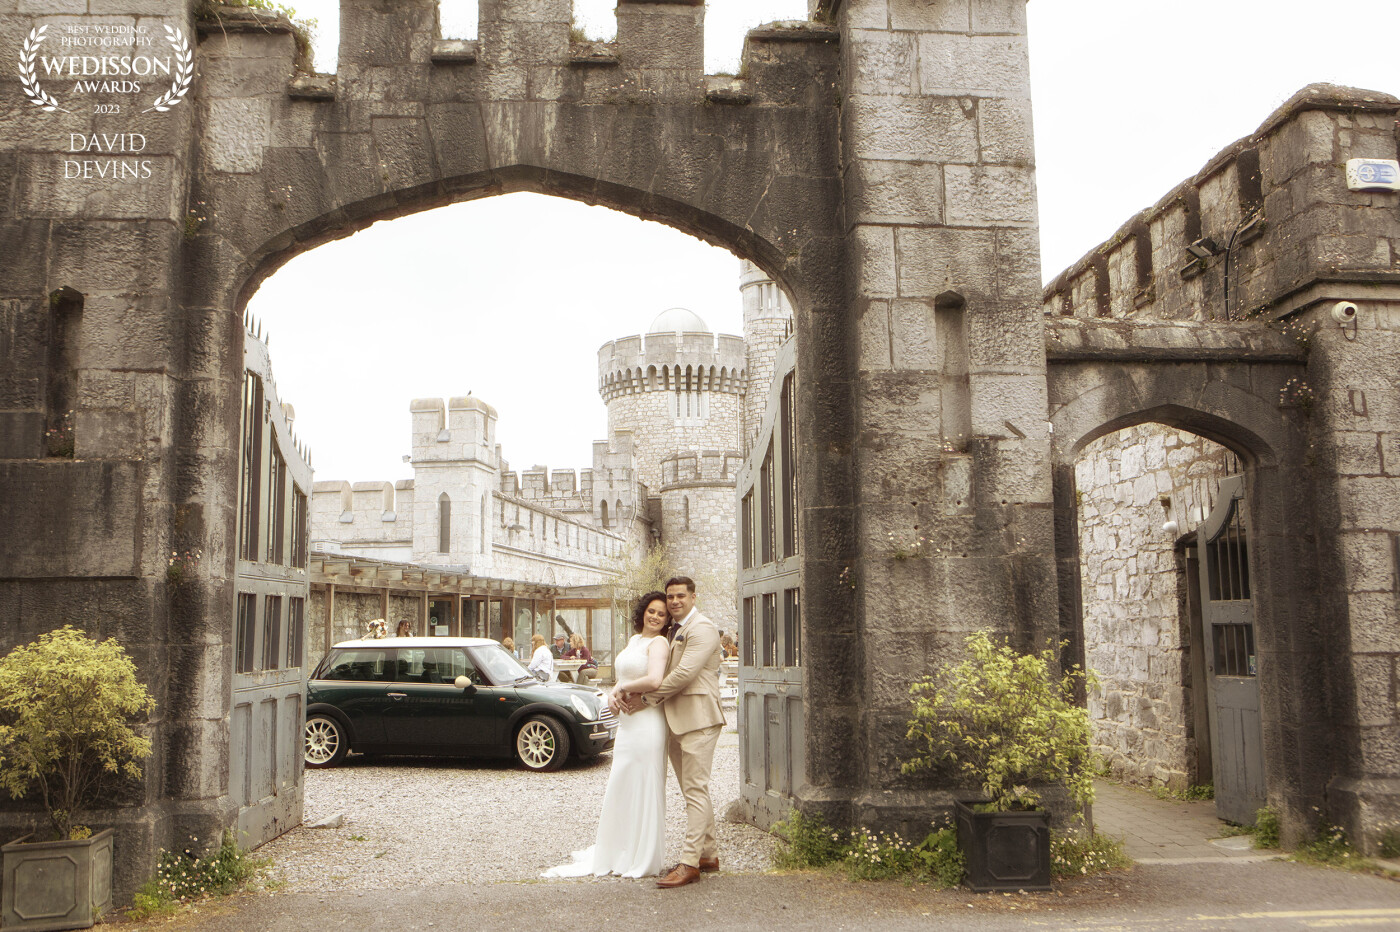 Nathalia & Peterson both from Brazil came together this summer with family and friends to celebrate their wedding day. The backdrop was the 1722 Blackrock Castle in Cork Ireland. blessed with a beautiful bride and groom along with sunny weather. We got some great shots.